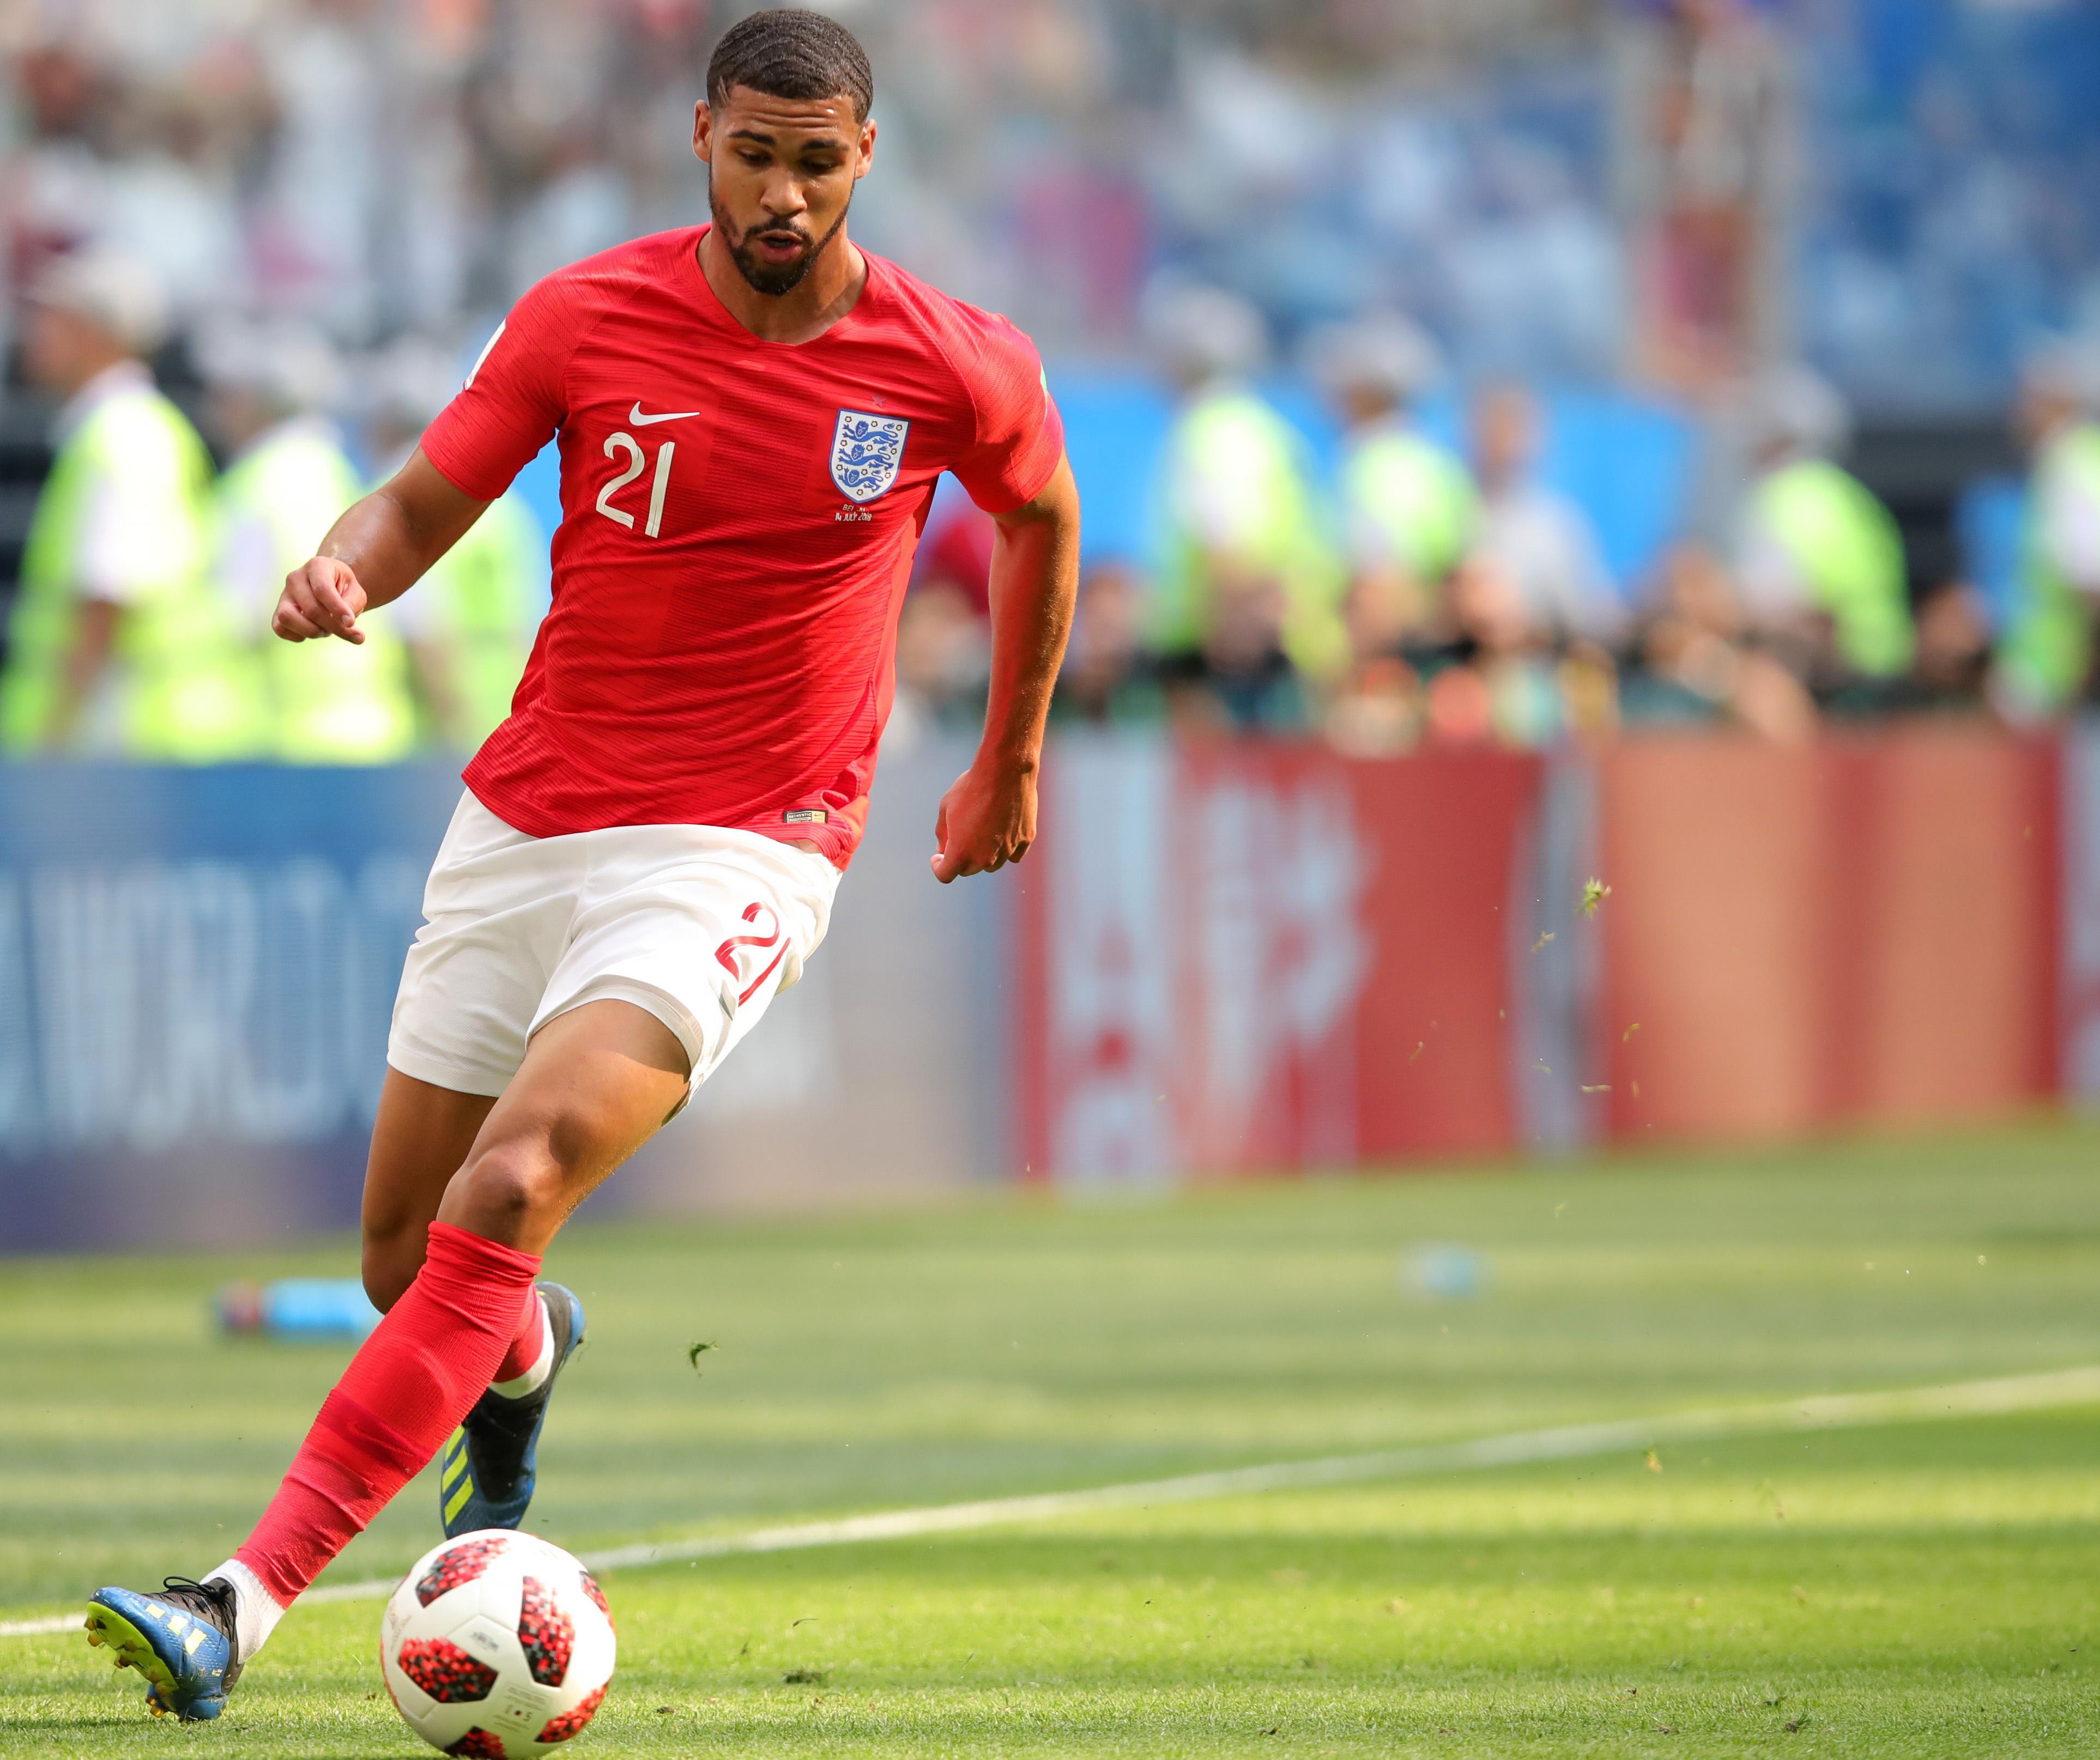 Chelsea News: Ruben Loftus-Cheek will not be sent out on loan this season - Reports